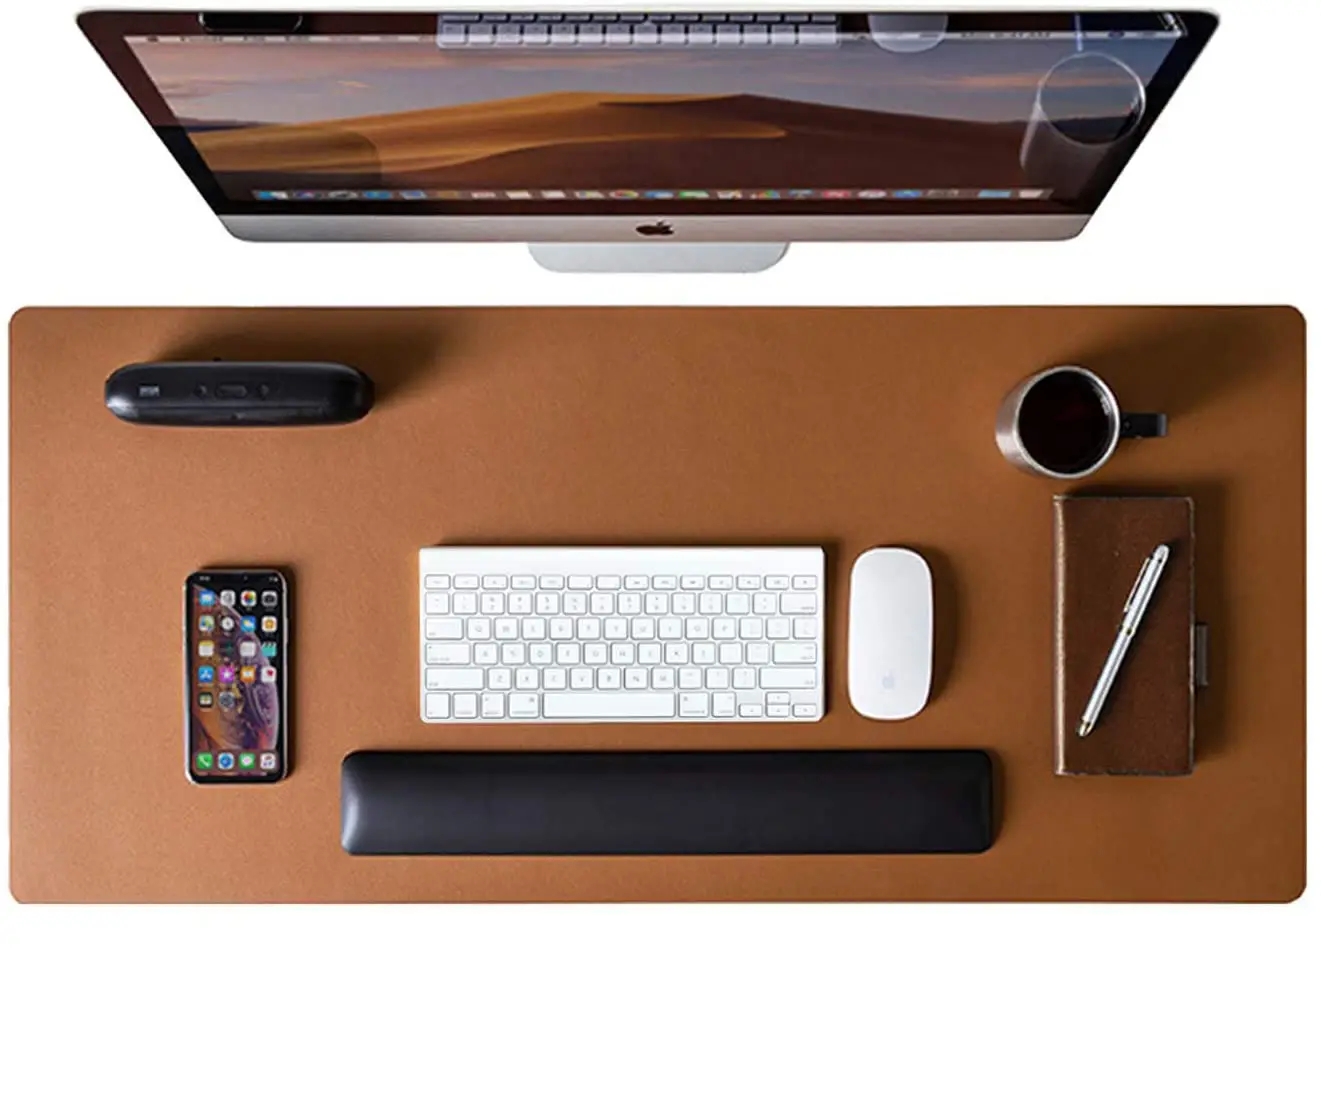 Pu Leather Desk Pad Protector,Mouse Pad Office Desk Mat